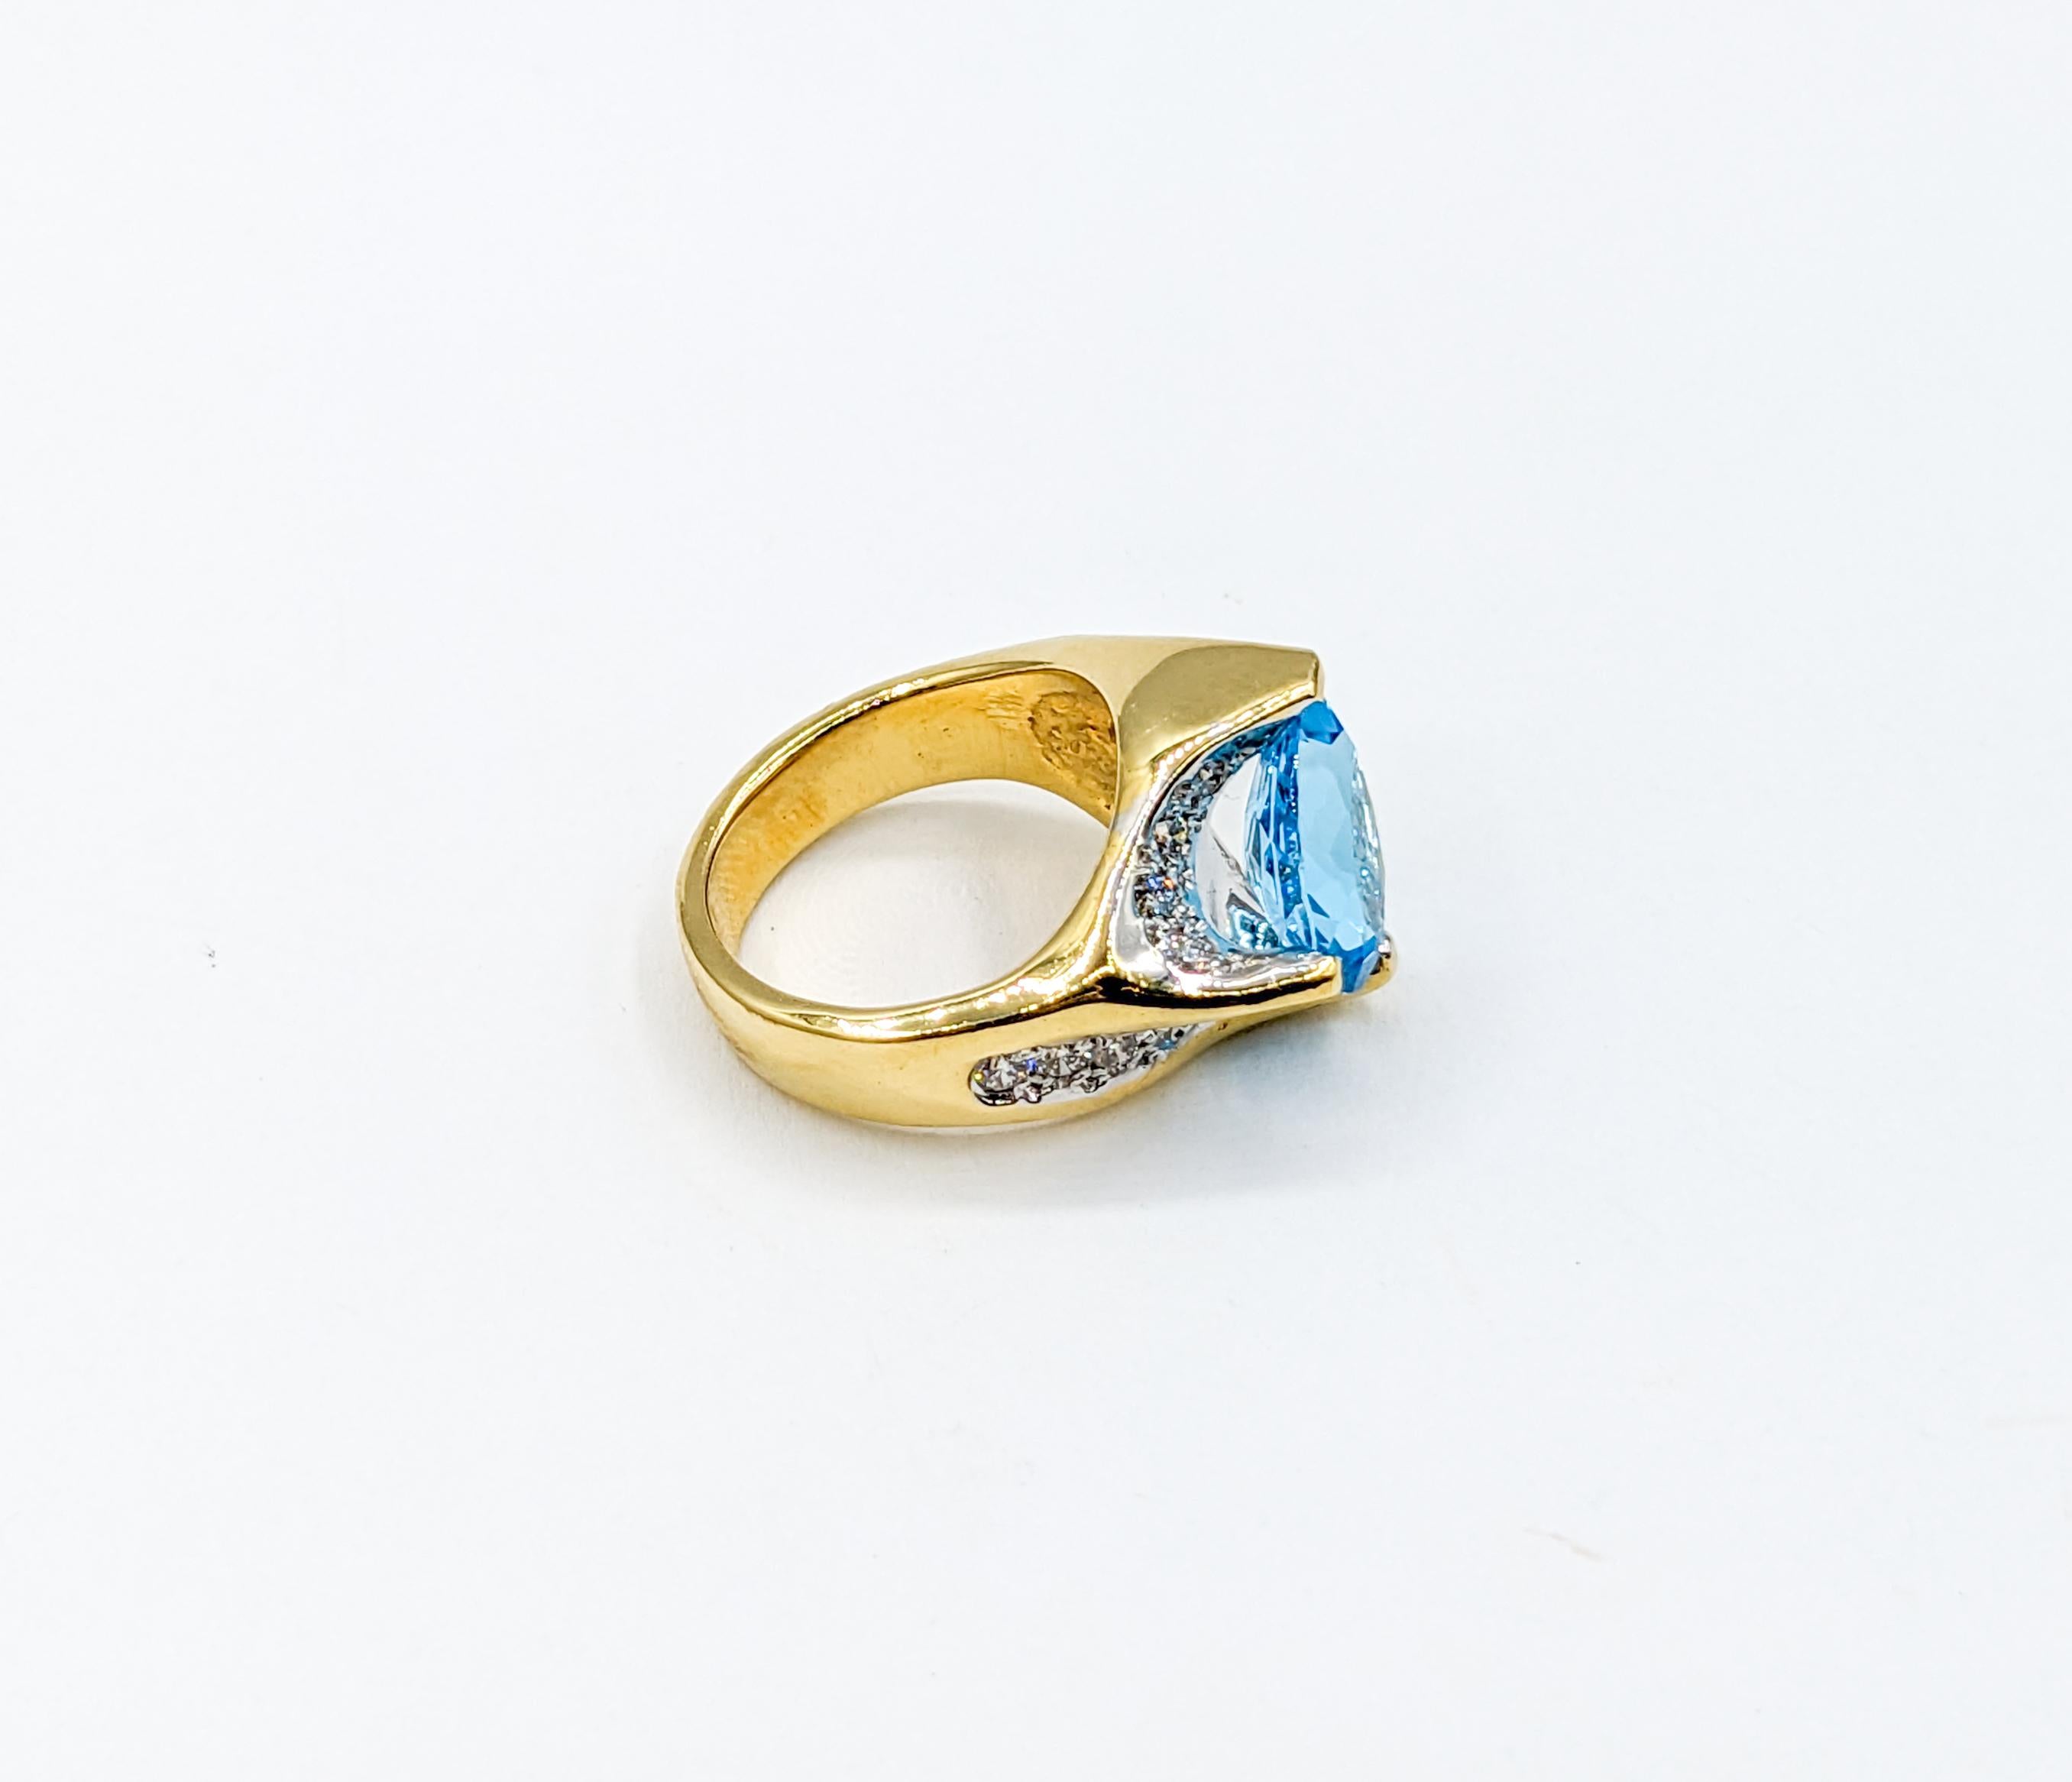 Artistic Blue Topaz & Diamond Cocktail Ring in 18k Gold In Excellent Condition For Sale In Bloomington, MN